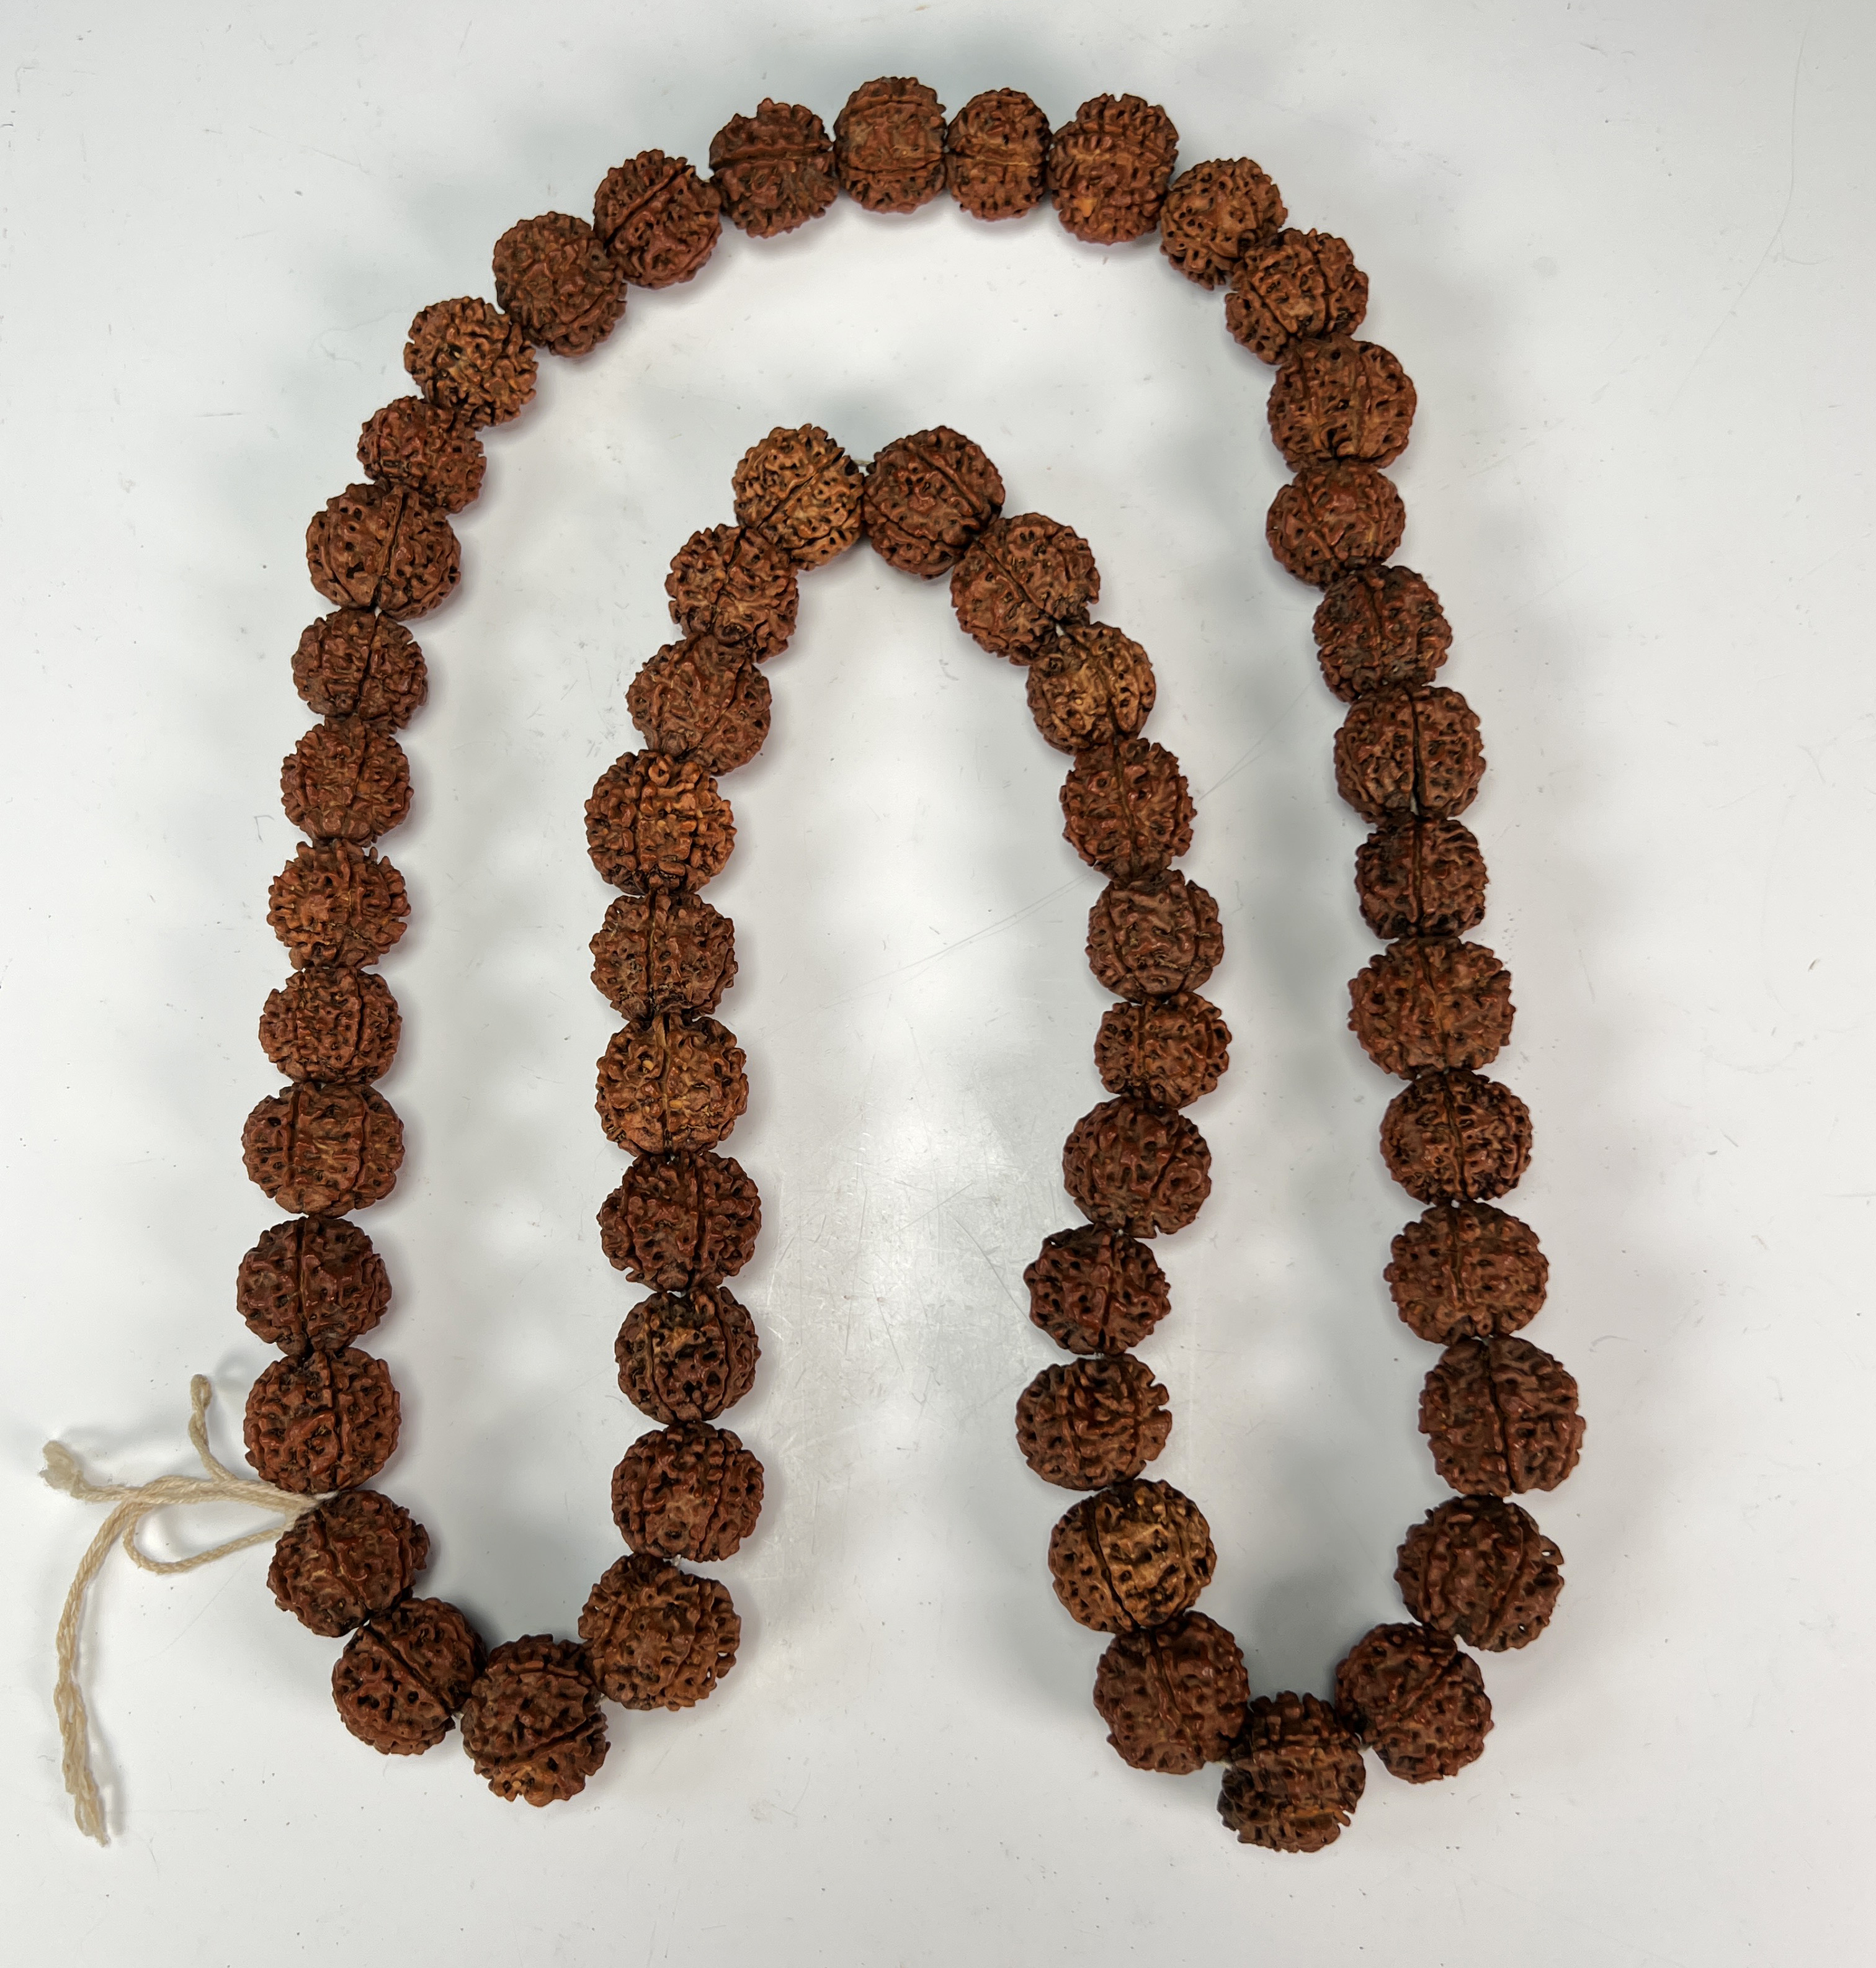 Traditional Chinese Puti Bead Necklace - A Cultural Gem image 2